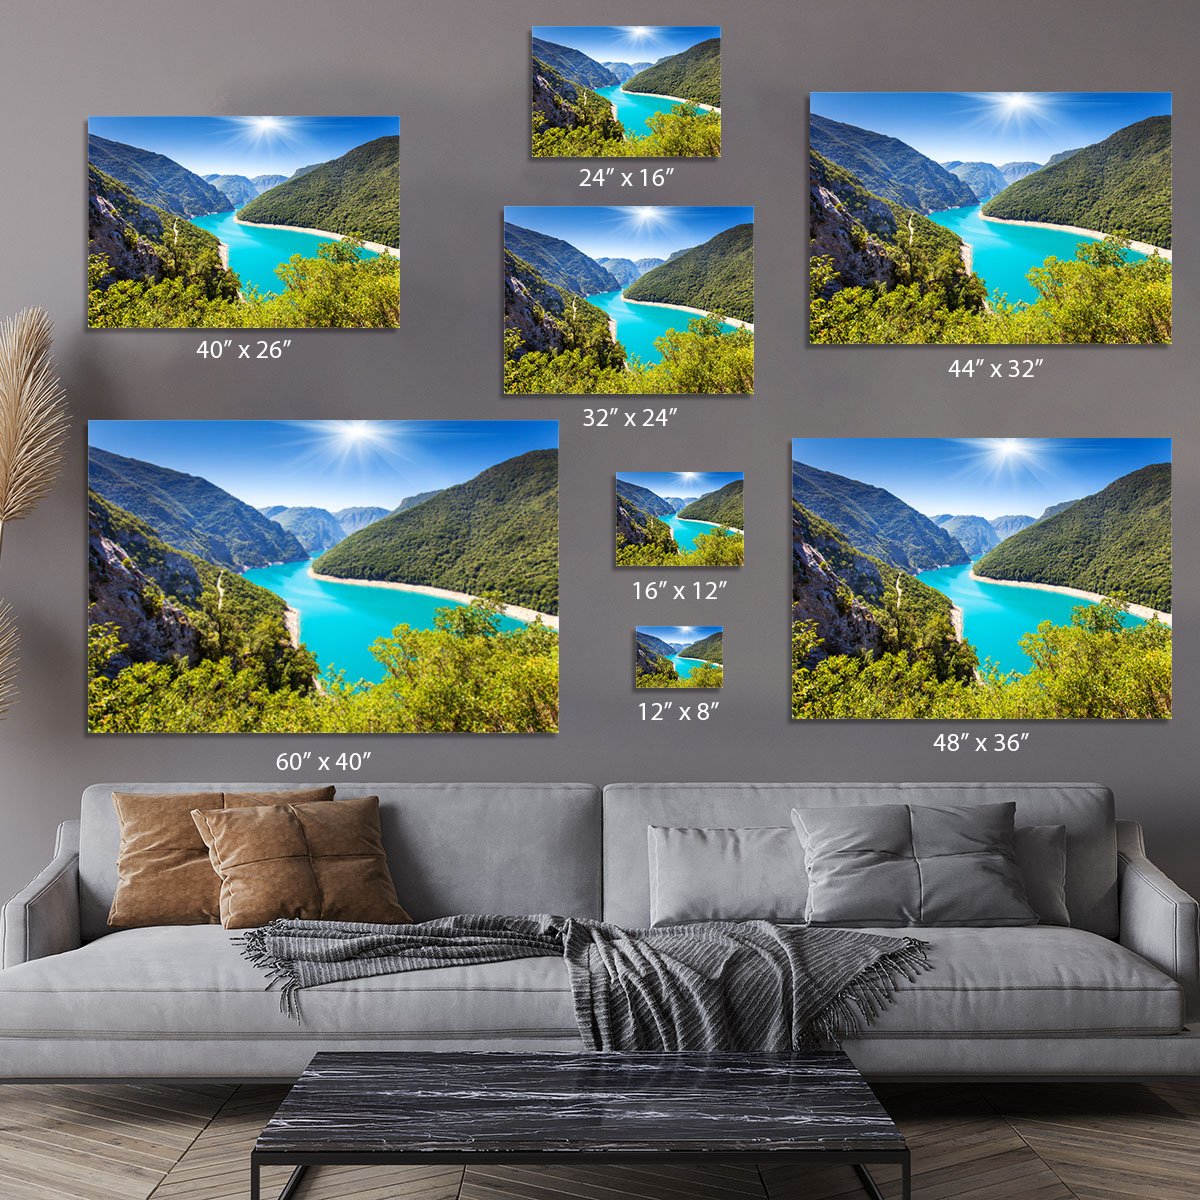 The Piva Canyon Canvas Print or Poster